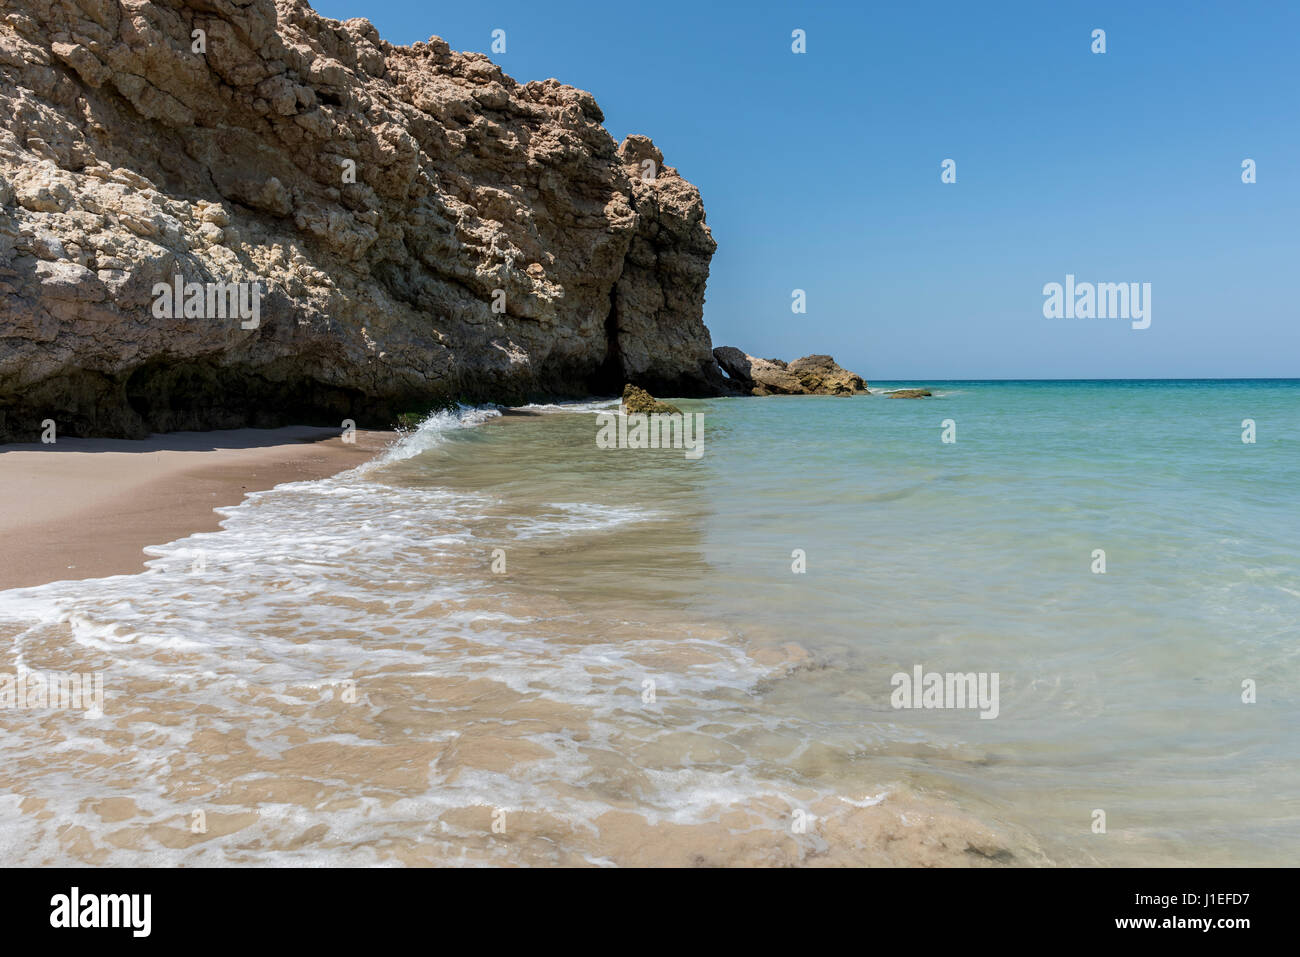 Calm water and wild beach at the coast of Ras Al Jinz, Sultanate of Oman. Horizontal shot with copy space Stock Photo